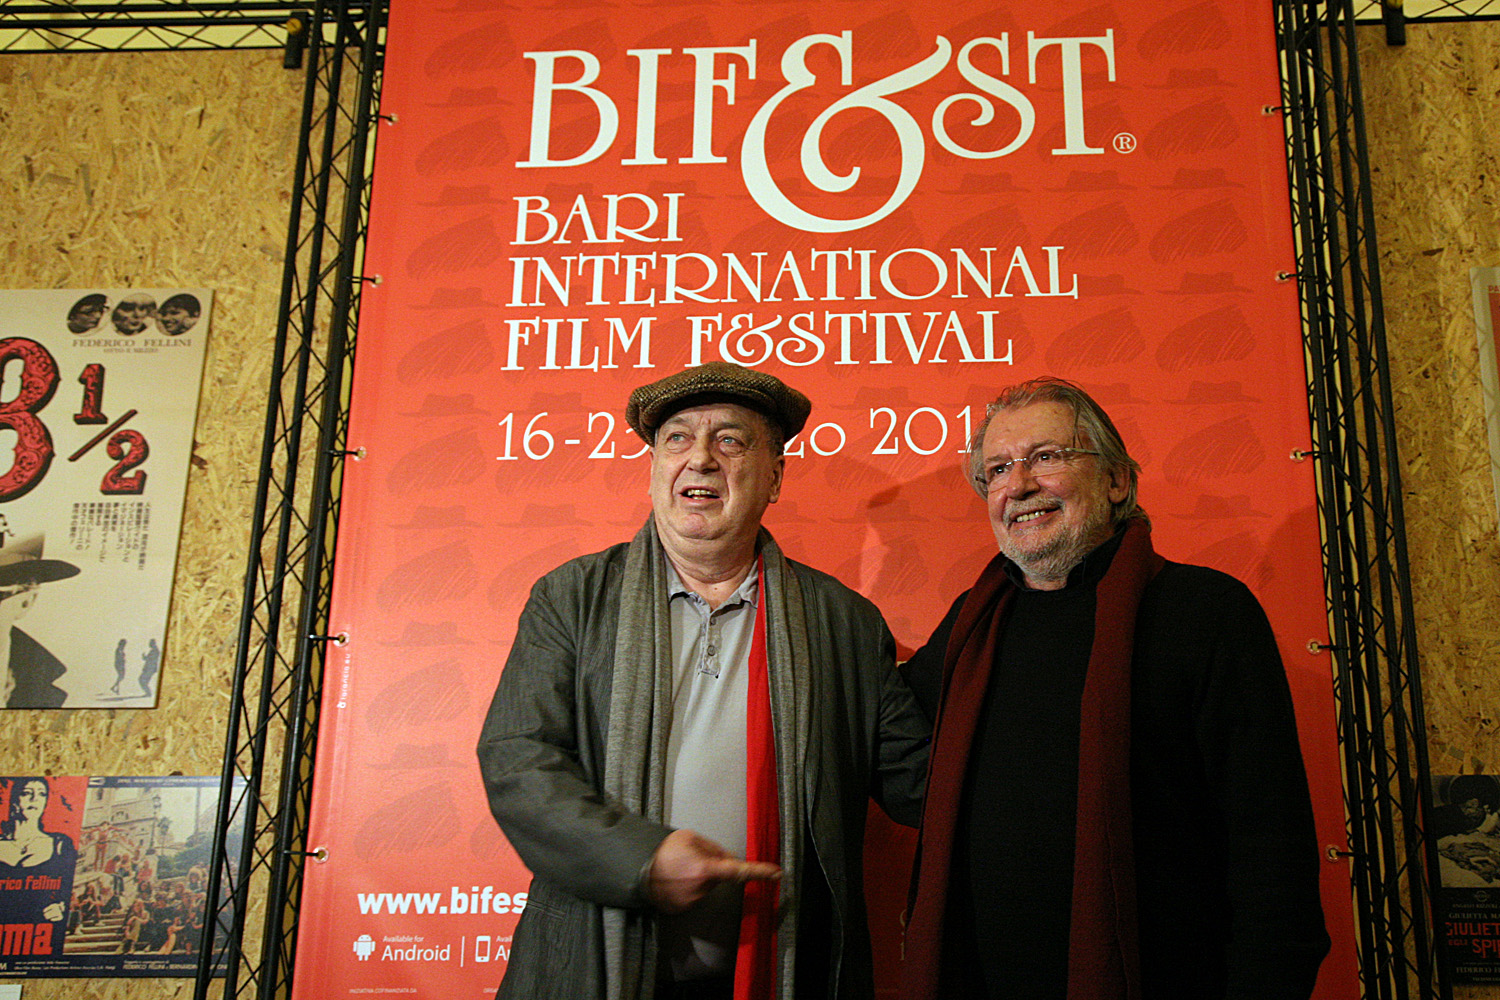 with Stephen Frears